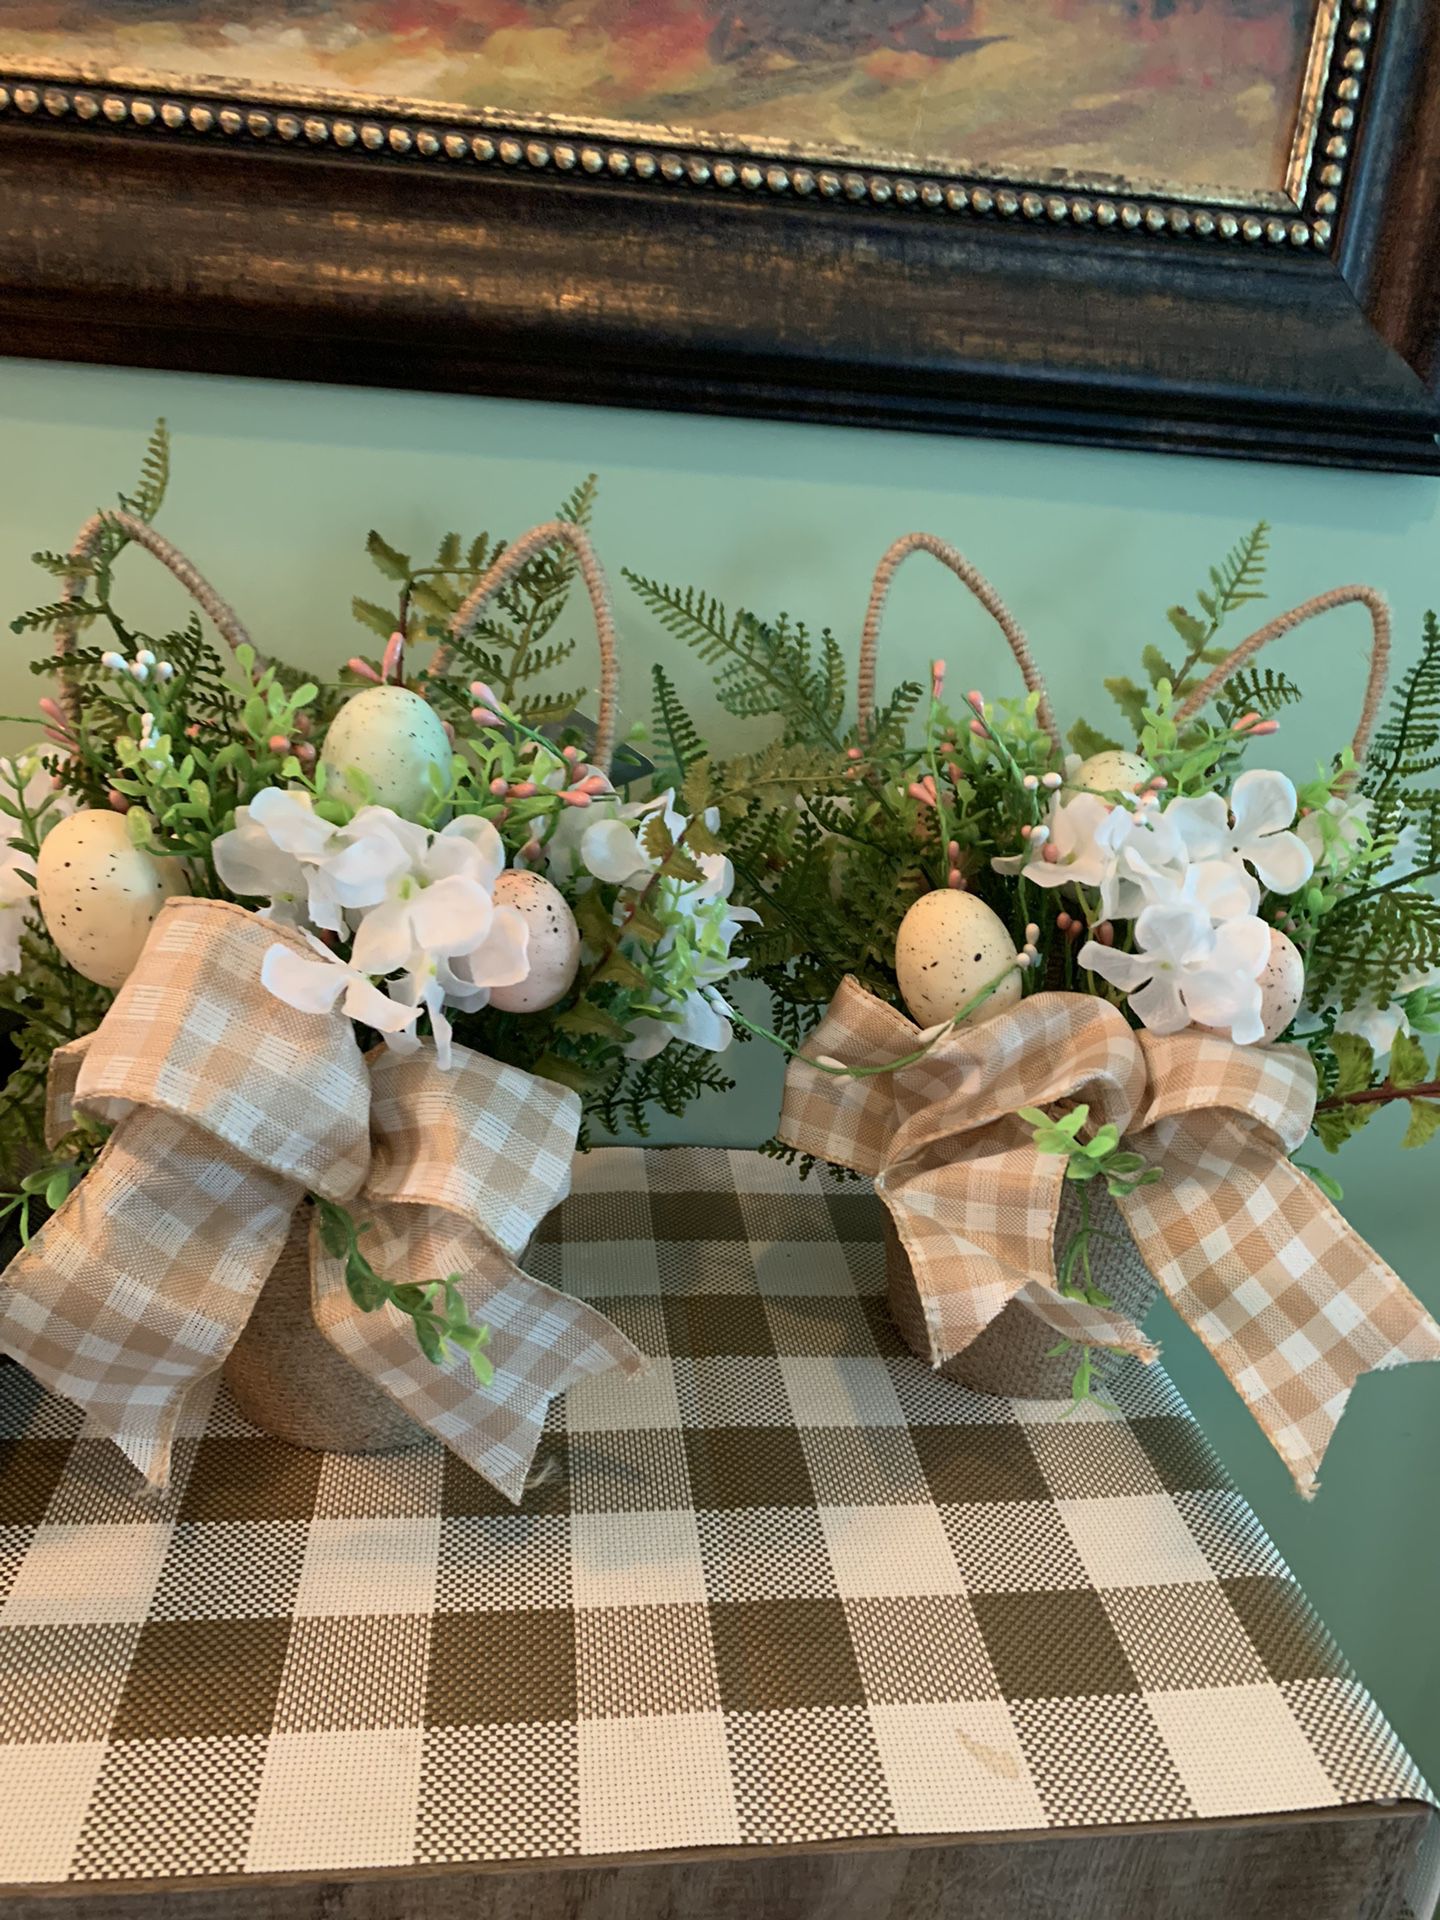 2 Easter Egg & Flowers  Arrangement In Burlap Wrapped Pot, Bunny Ears, Checkered Bow Accent. 